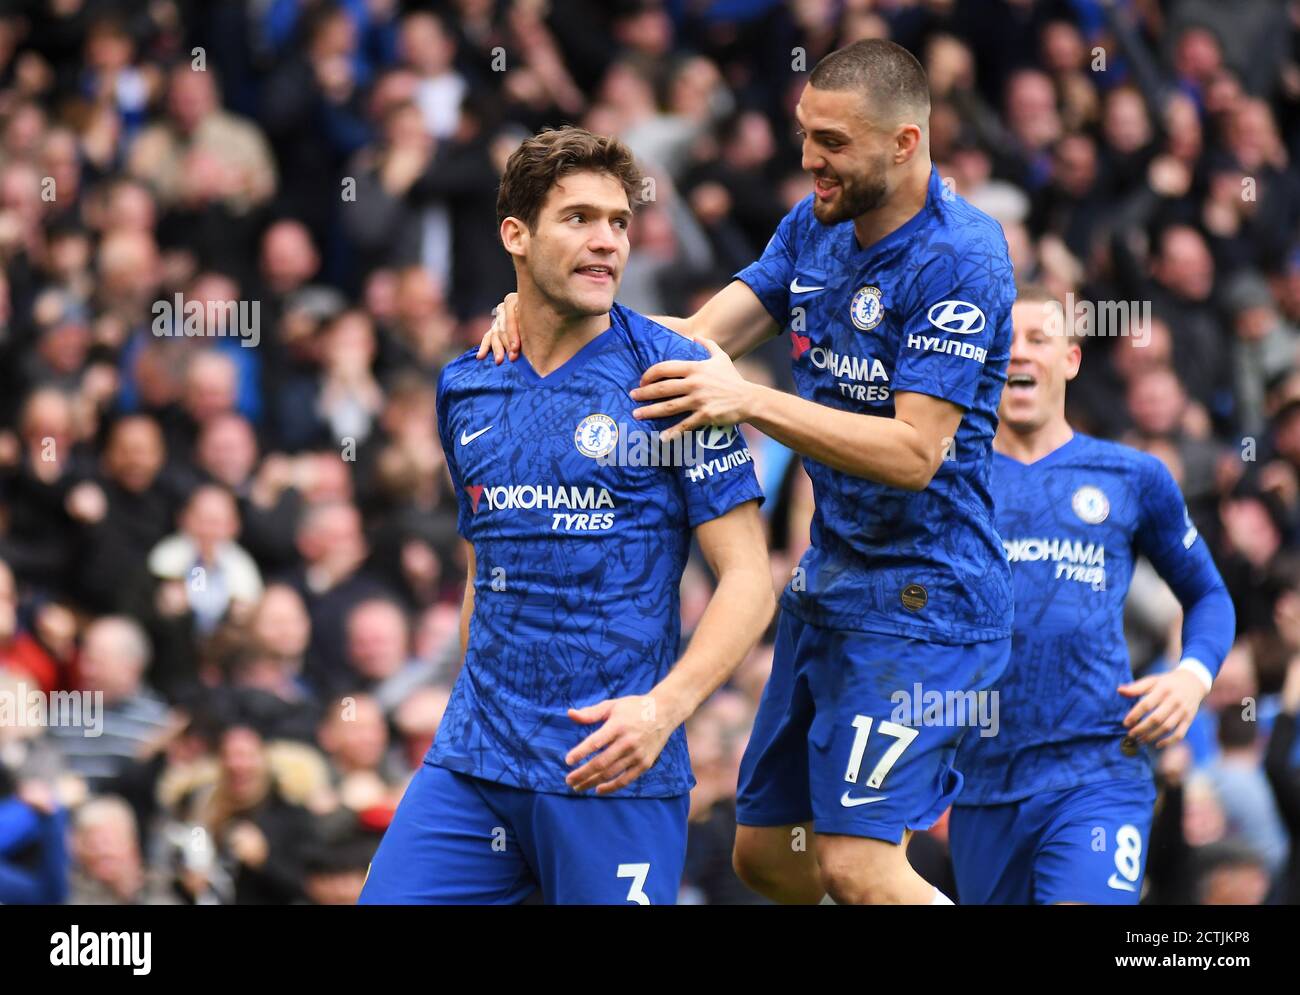 LONDON, ENGLAND - FEBRUARY 22, 2020: Marcos Alonso of Chelsea celebrates with Mateo Kovacic of Chelsea after he scored a goal during the 2019/20 Premier League game between Chelsea FC and Tottenham Hotspur FC at Stamford Bridge. Stock Photo